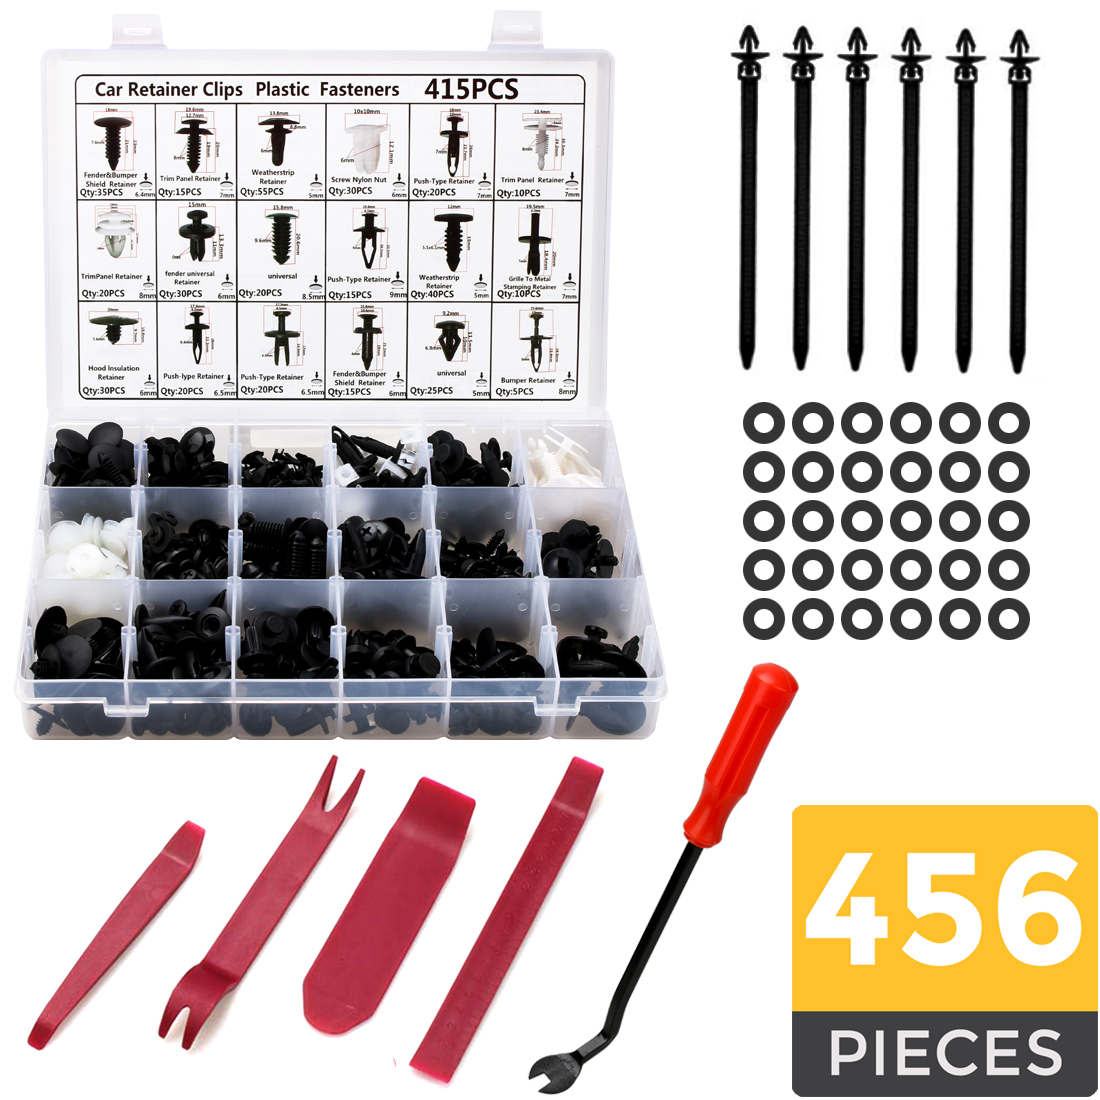 Car Retainer Clips Justech 630PCs 16 Sizes Car Trim Clips Plastic Fastener Kit Auto Push Pin Rivets Car Body Trim Clips Assortment with Auto Trim Removal Tools and Straps